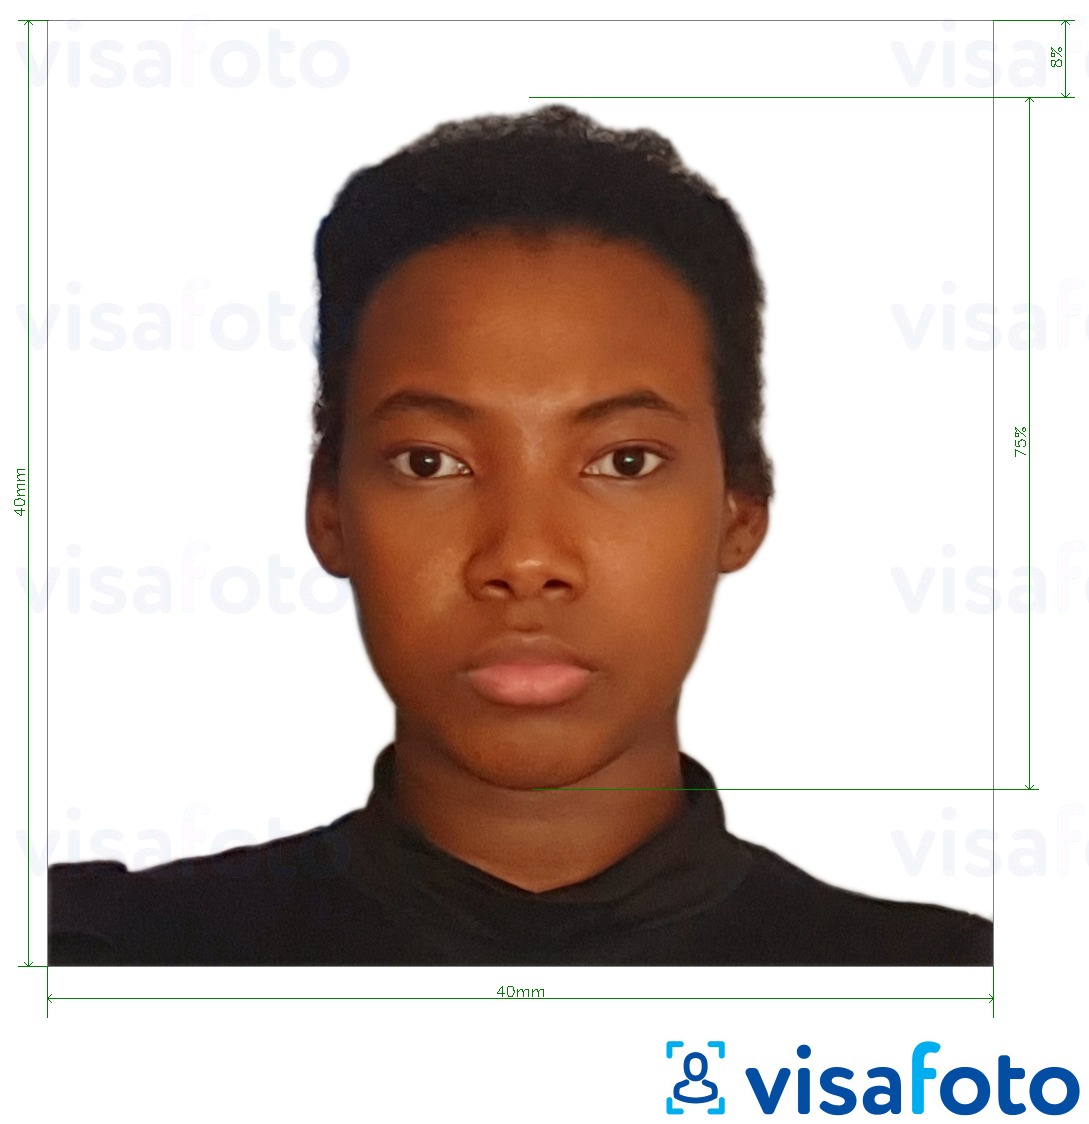 Example of photo for Cameroon passport 4x4 cm (40x40 mm) with exact size specification